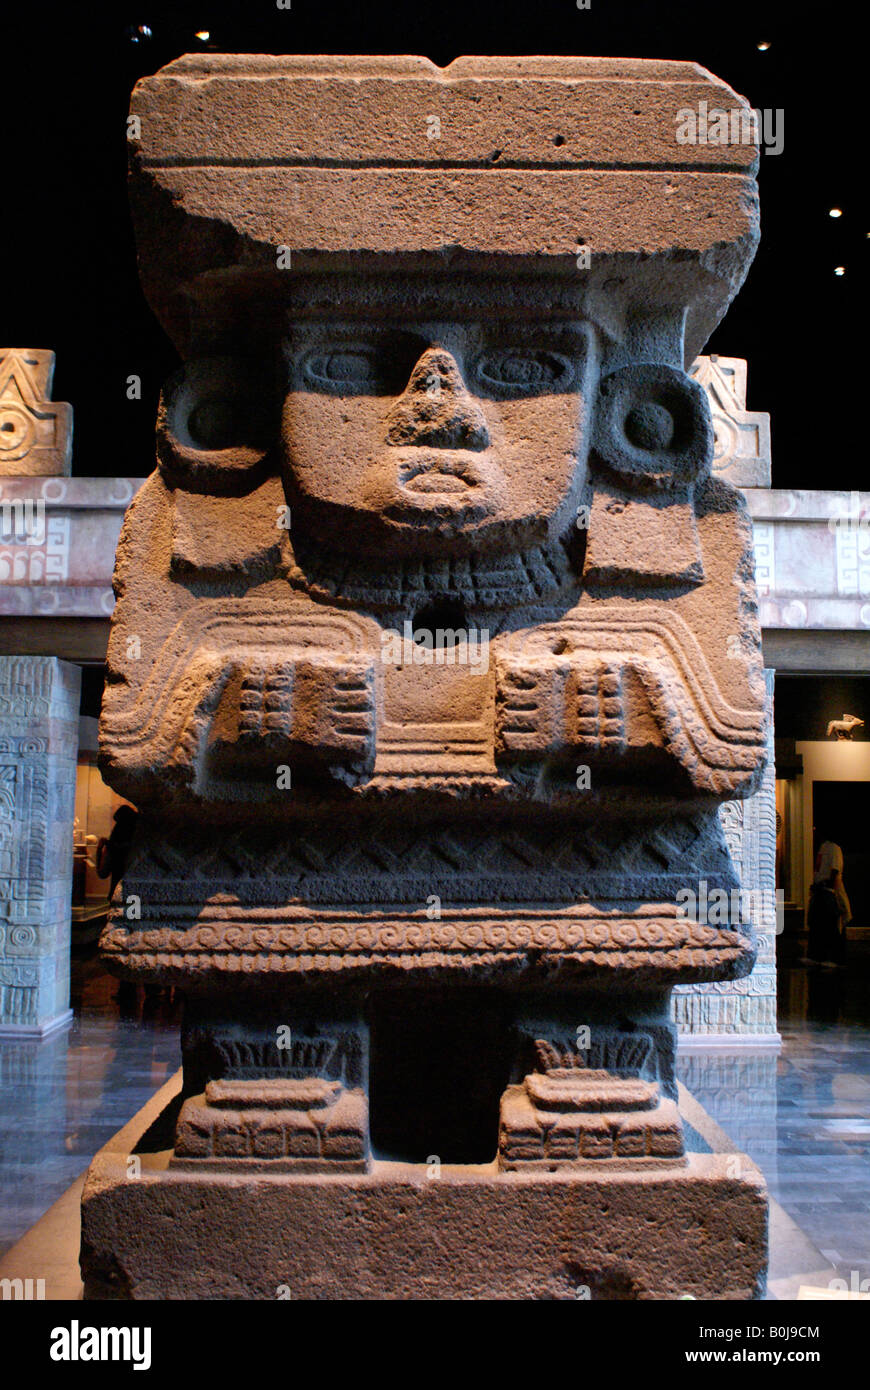 Sculpture of Aztec water goddess Chalchiutlicue, National Museum of Anthropology, Chapultepec Park,Mexico City Stock Photo